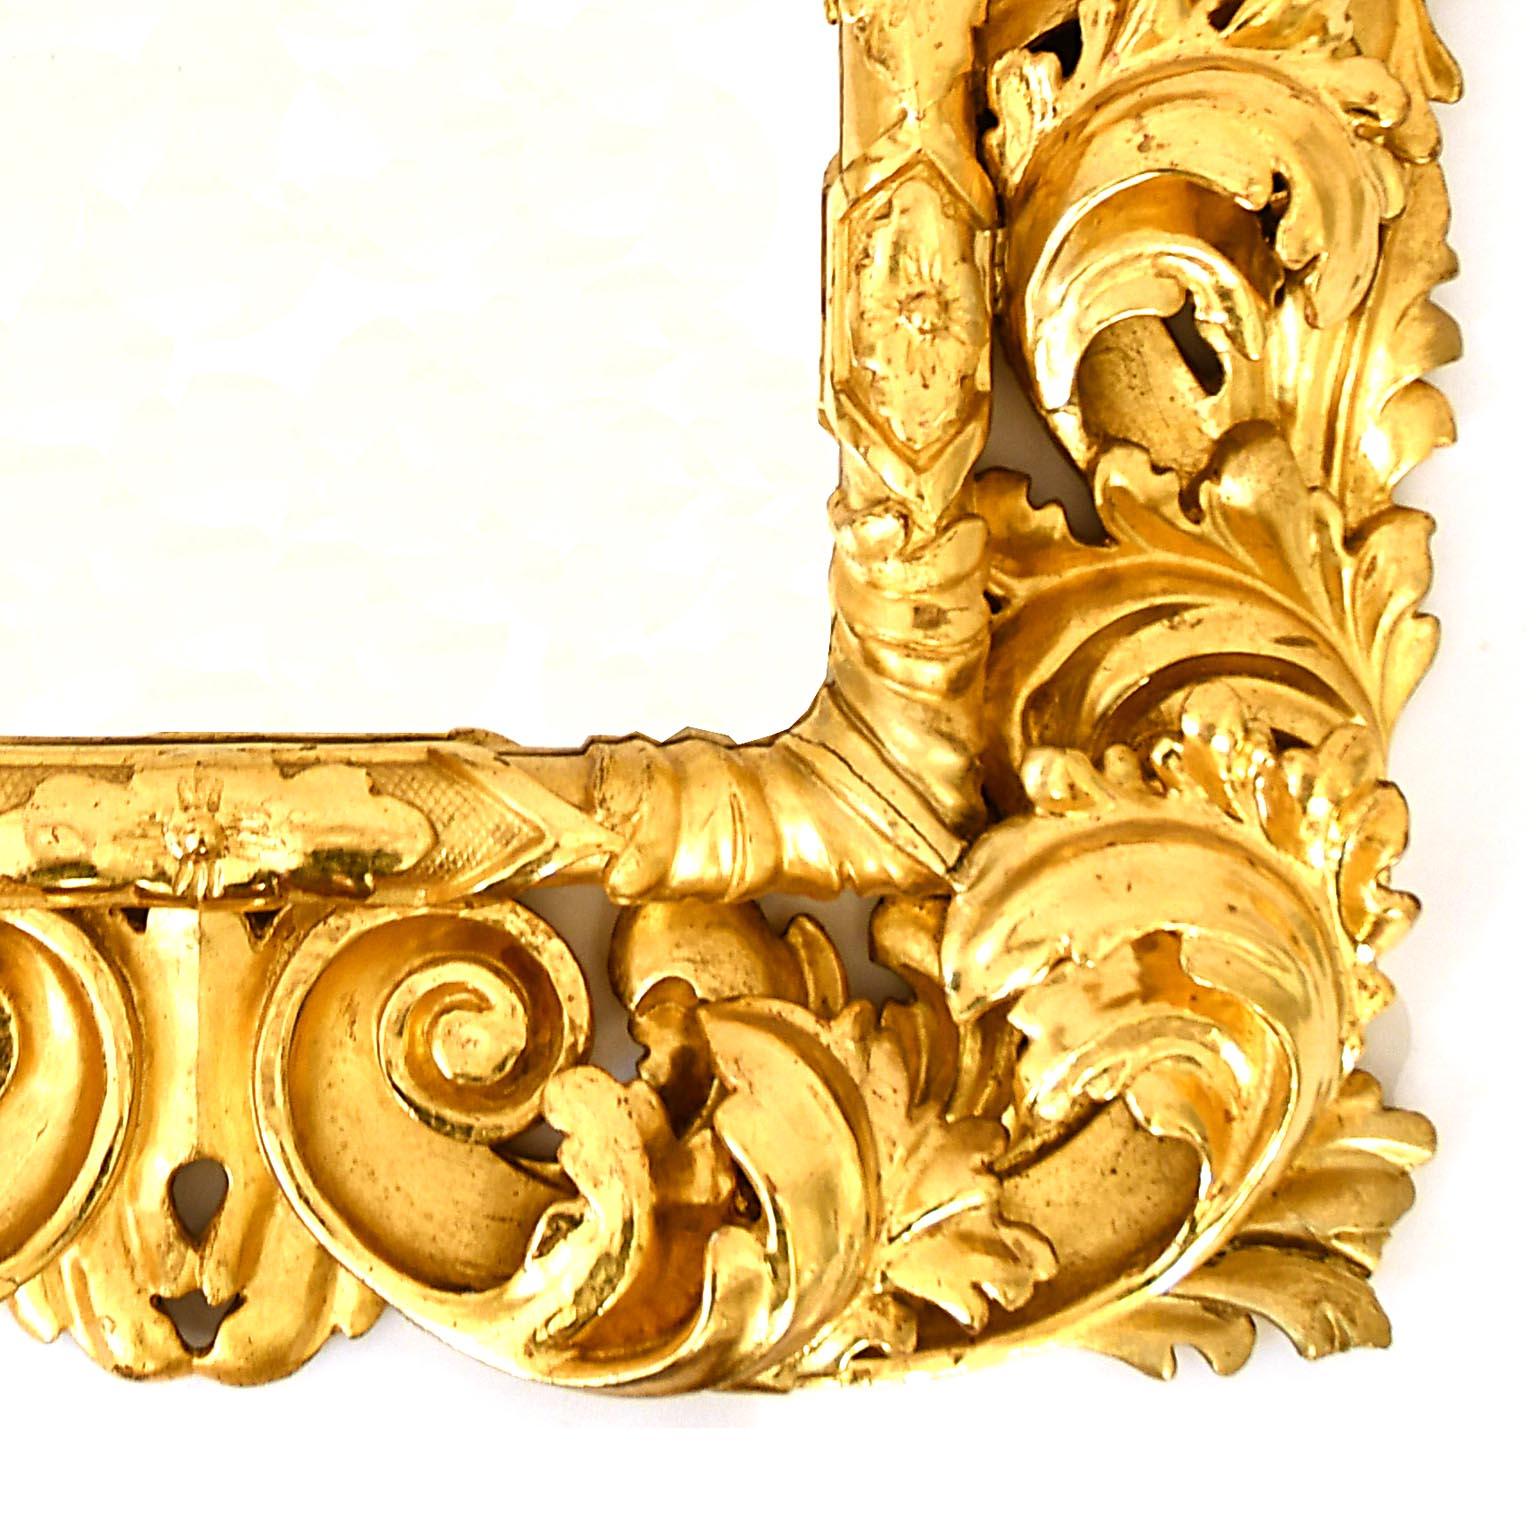 Hand-Carved Florentine Mirrow Giltwood Baroque Revival Style Rectangular 19th Century For Sale